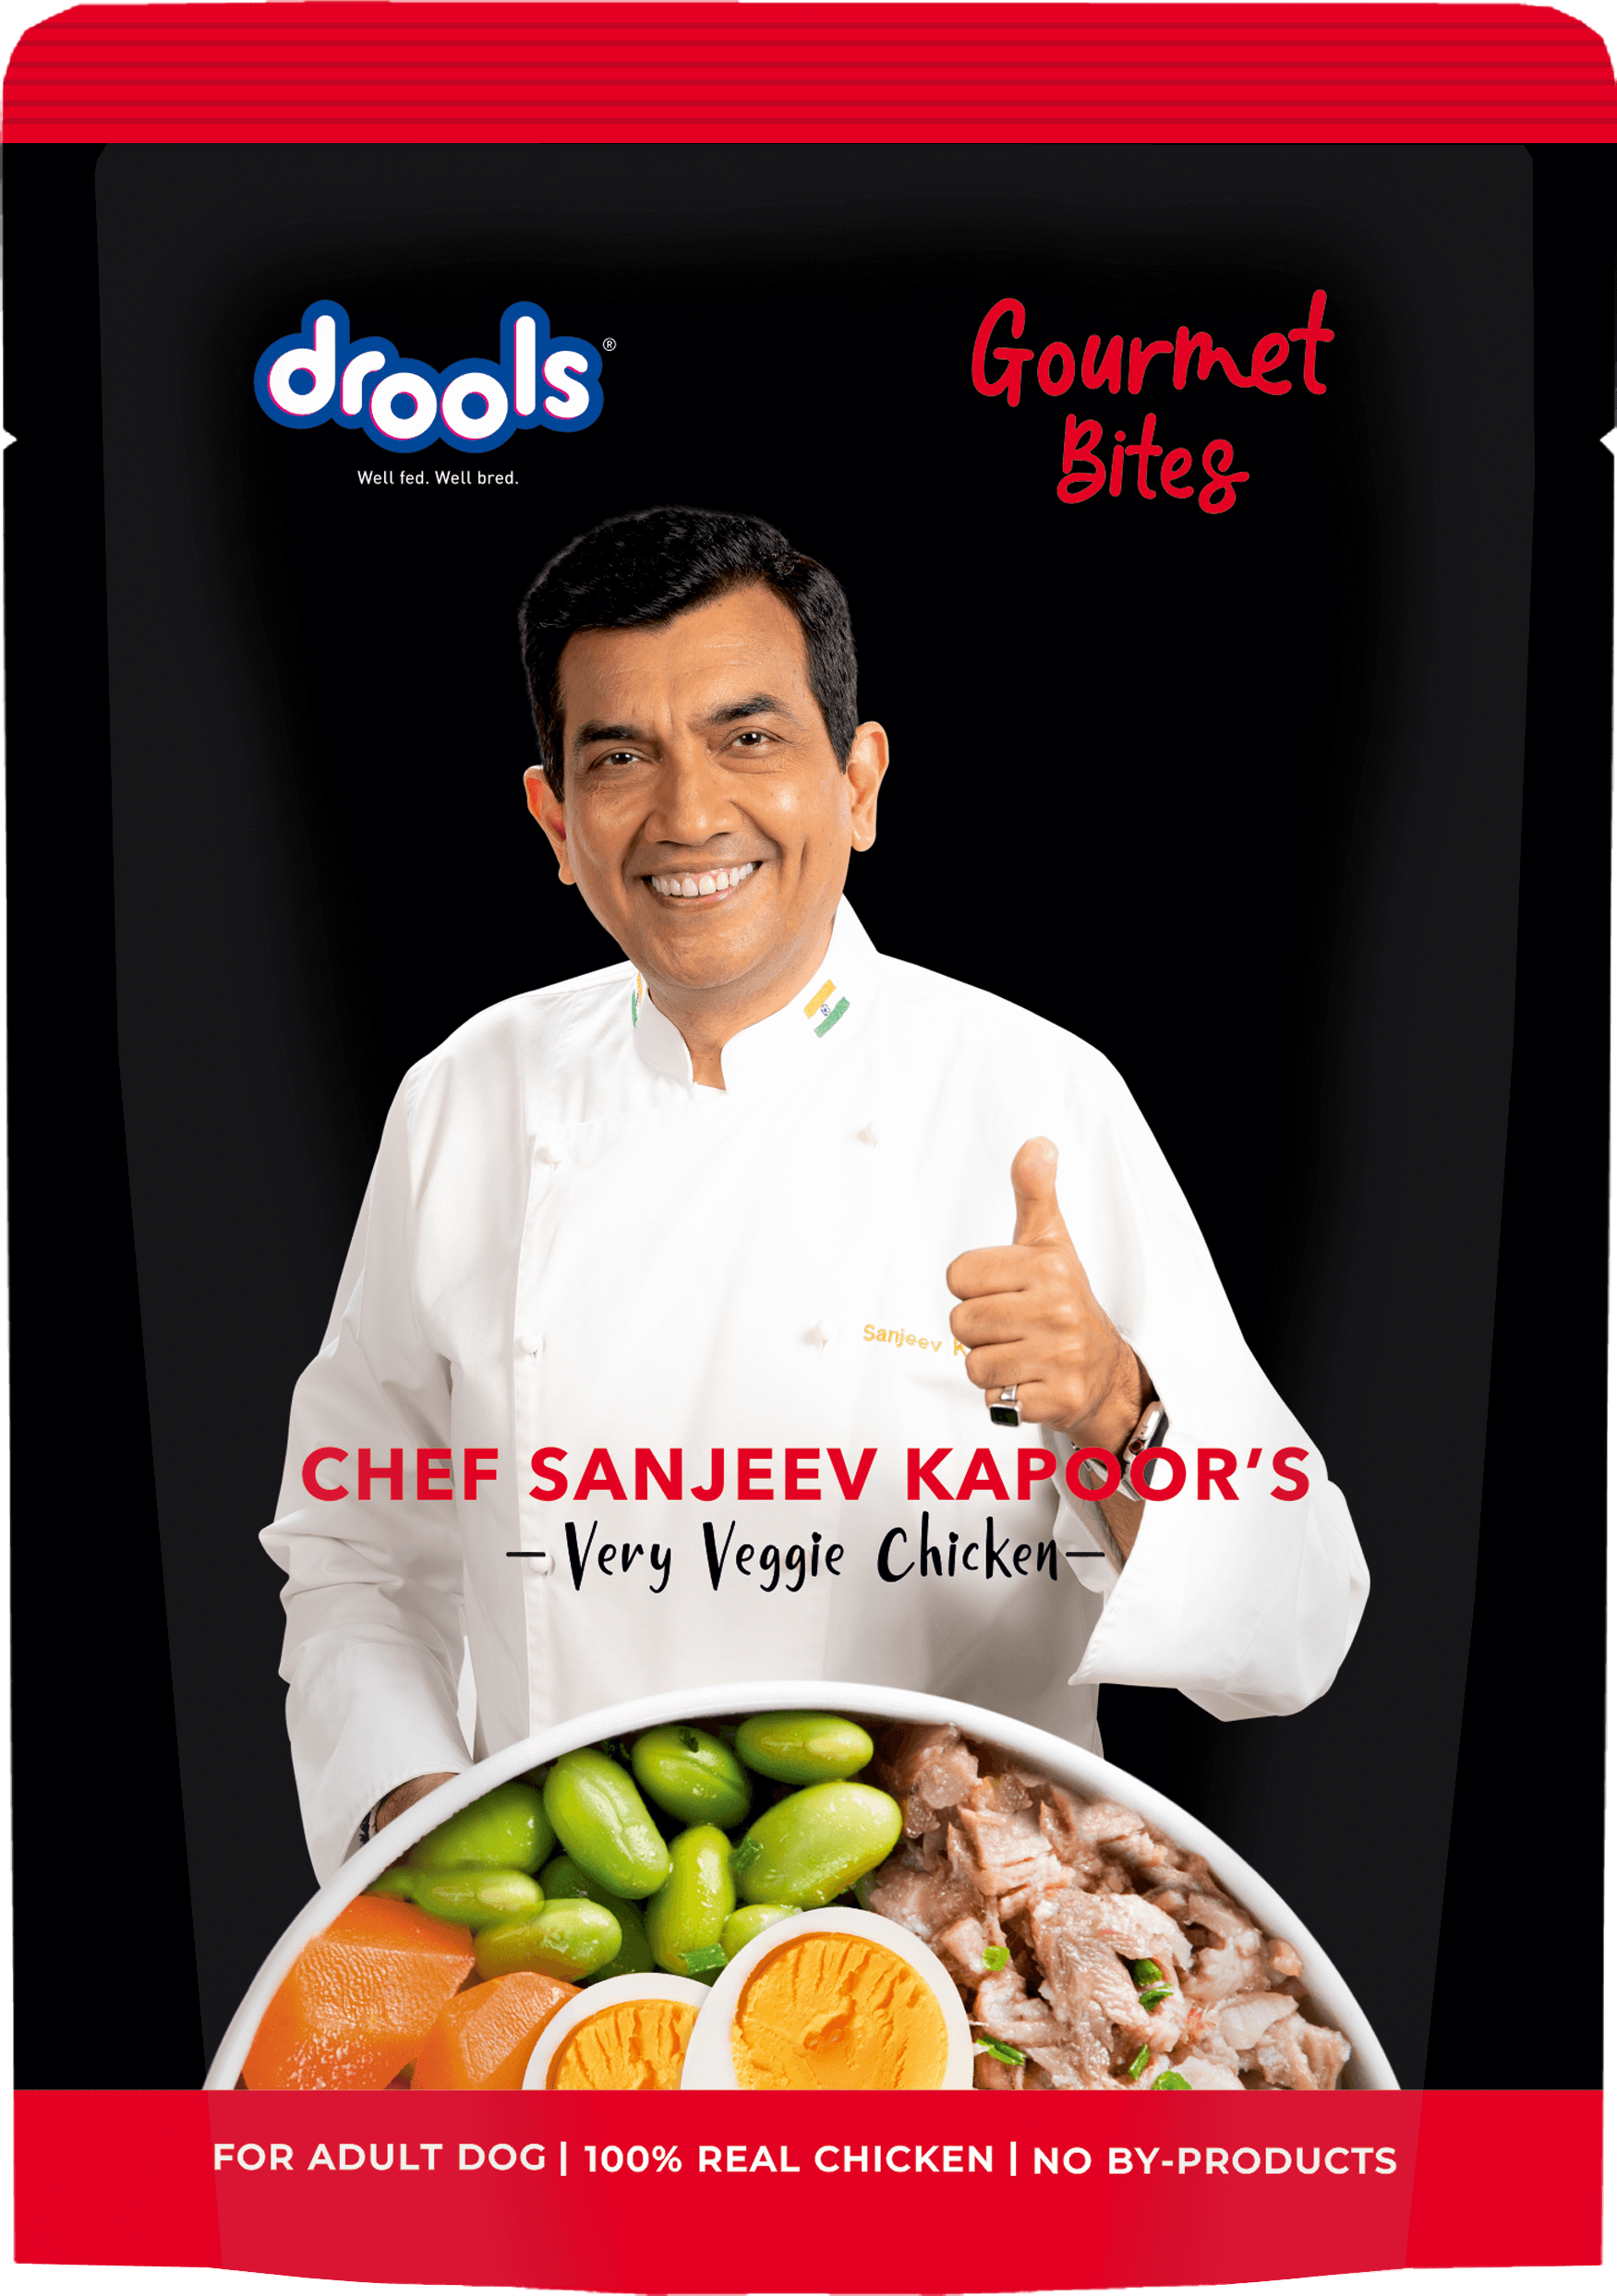 Chef Sanjeev Kapoor’s Gourmet Bites for Adult Dogs